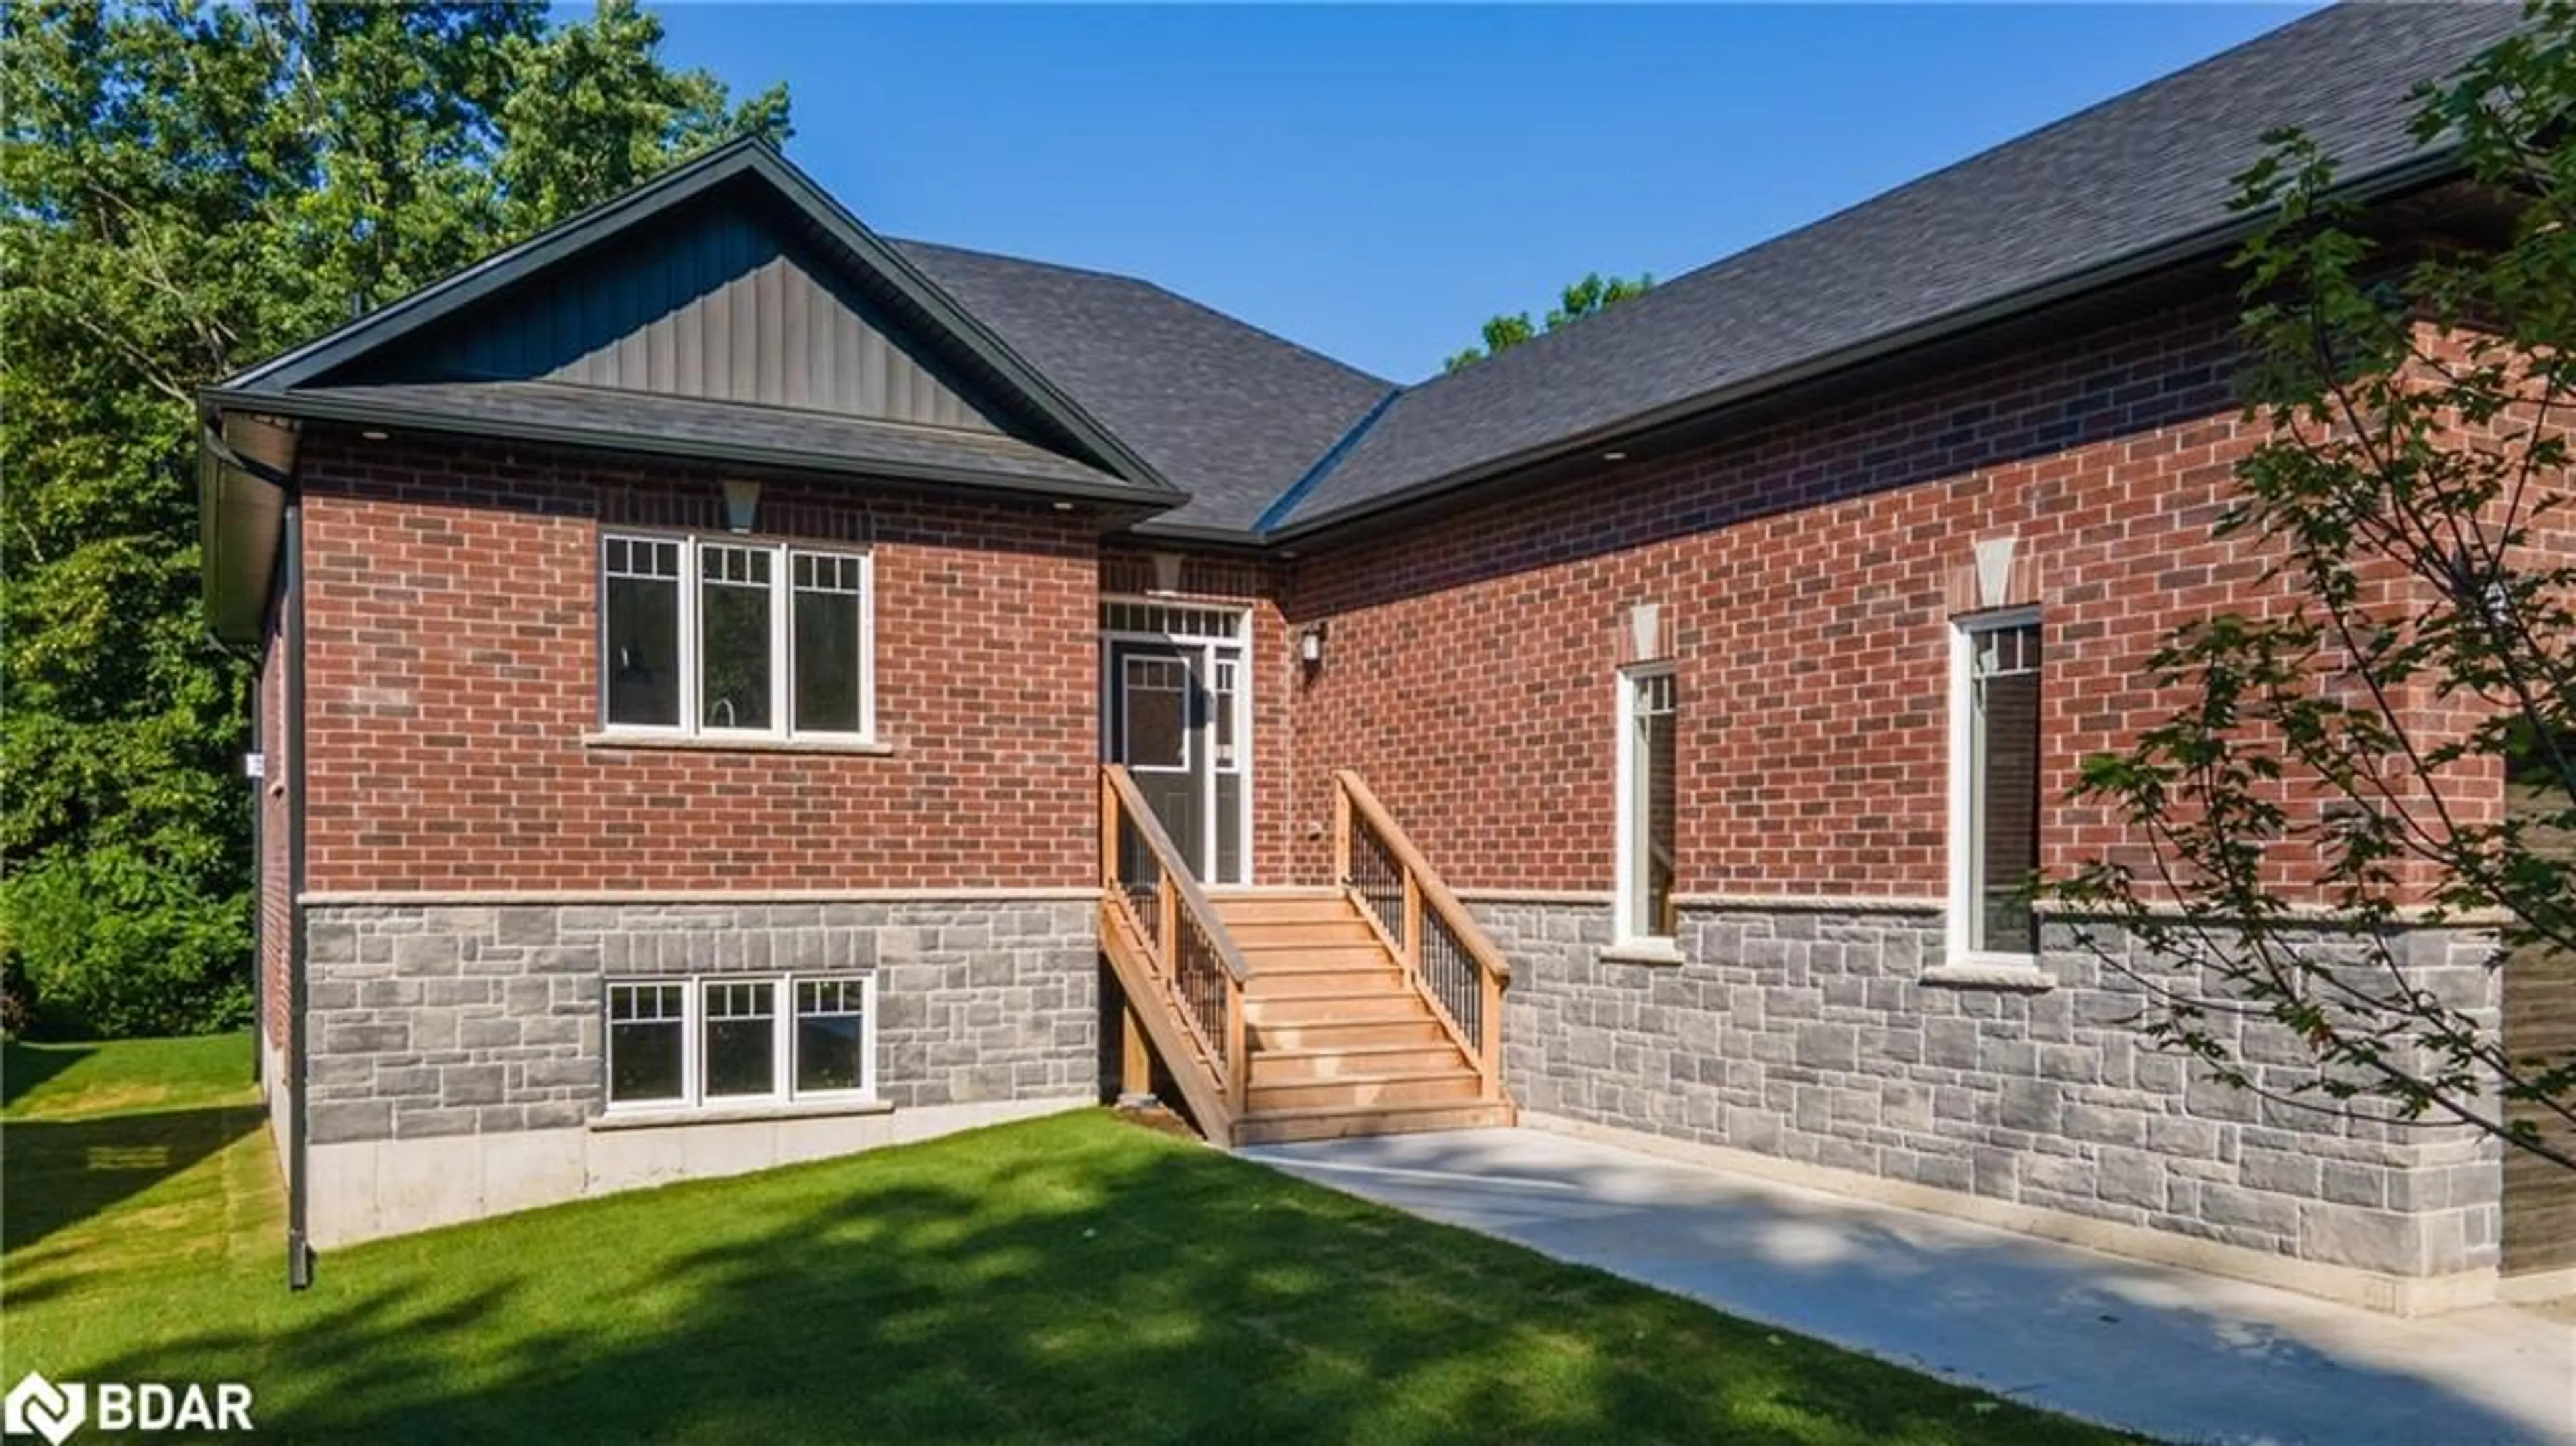 Home with brick exterior material for 8 Alexander Street St, Minesing Ontario L3V 3T8